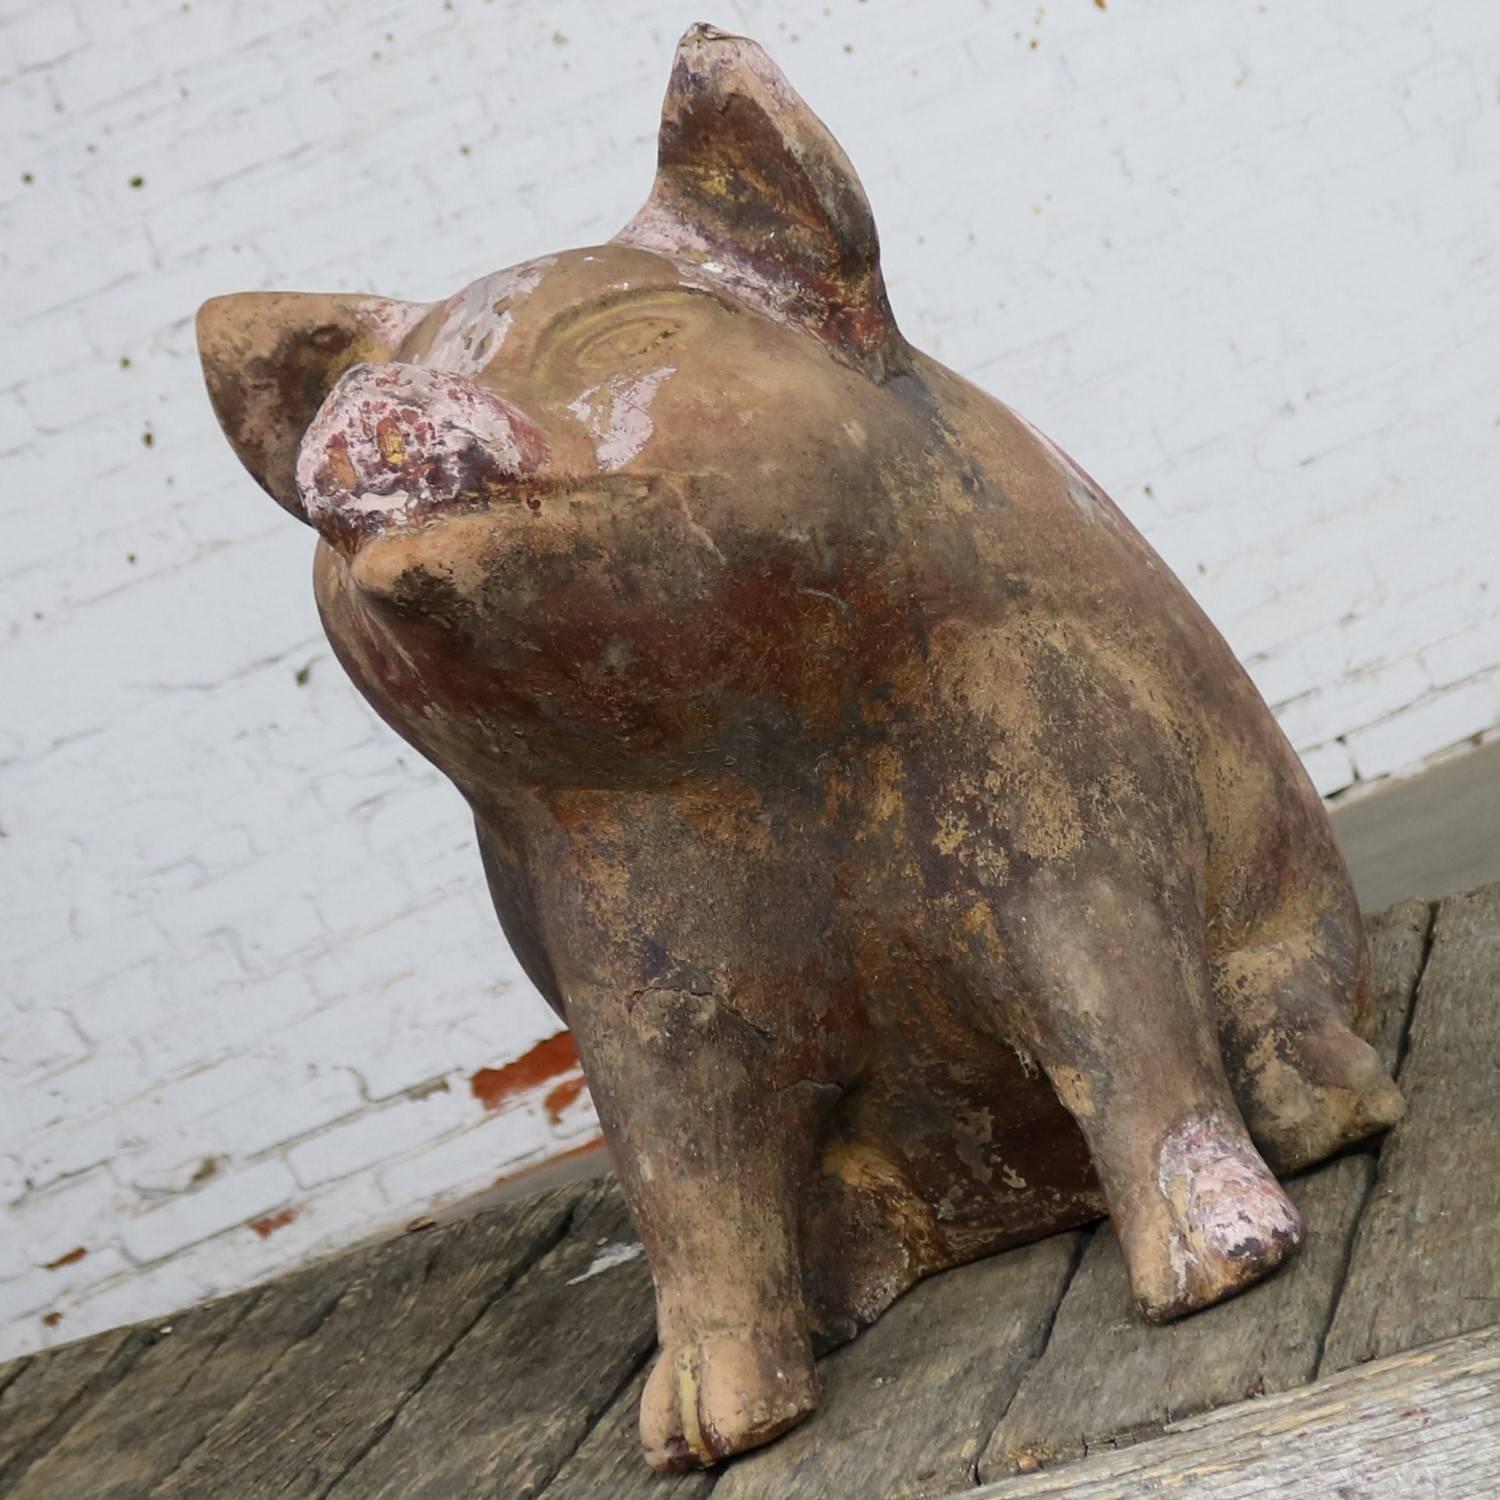 Adorable very large near life-size terracotta pig planter or pot. This guy is in great shape with wonderful patina. He does have a few cracks, nicks, and dings but they only make him look better. We do not know his exact age but feel he is late 20th